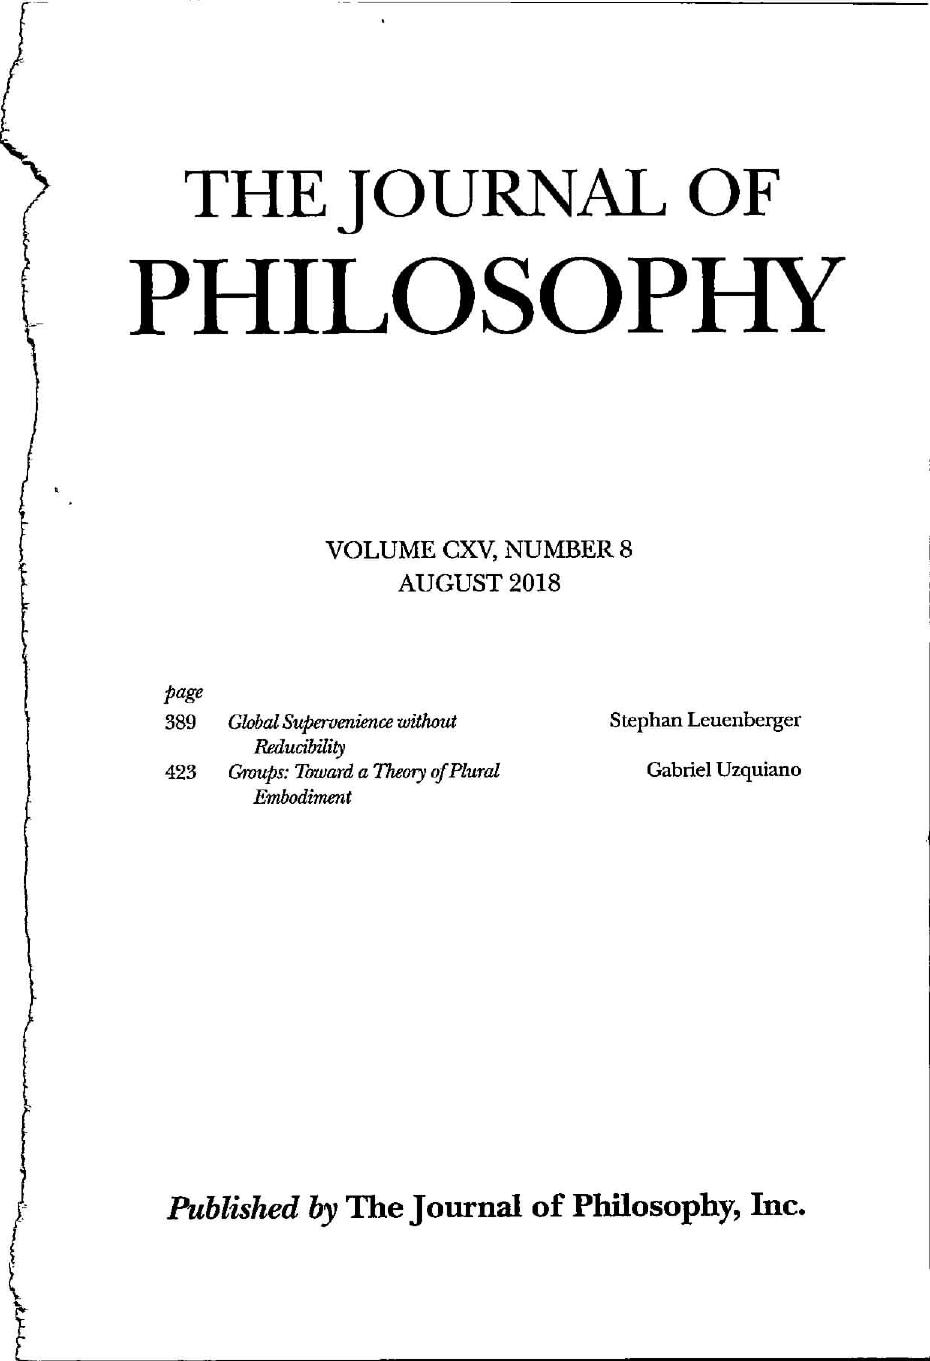 The Journal of Philosophy - Volume CXV, Number 8 - August 2018